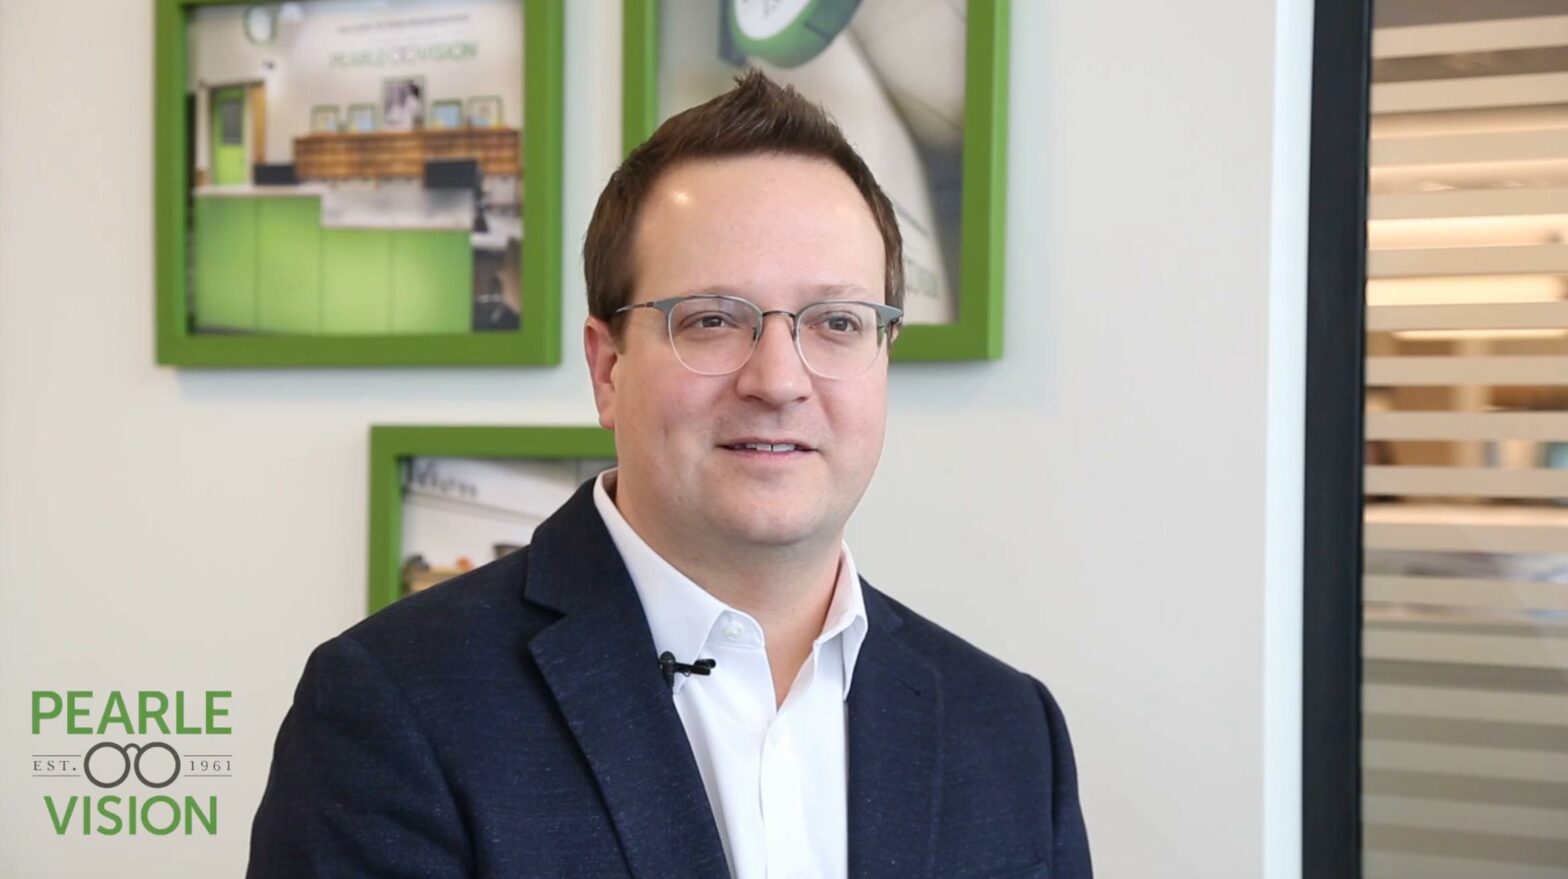 A portrait of Pearle Vision General Manager Alex Wilkes